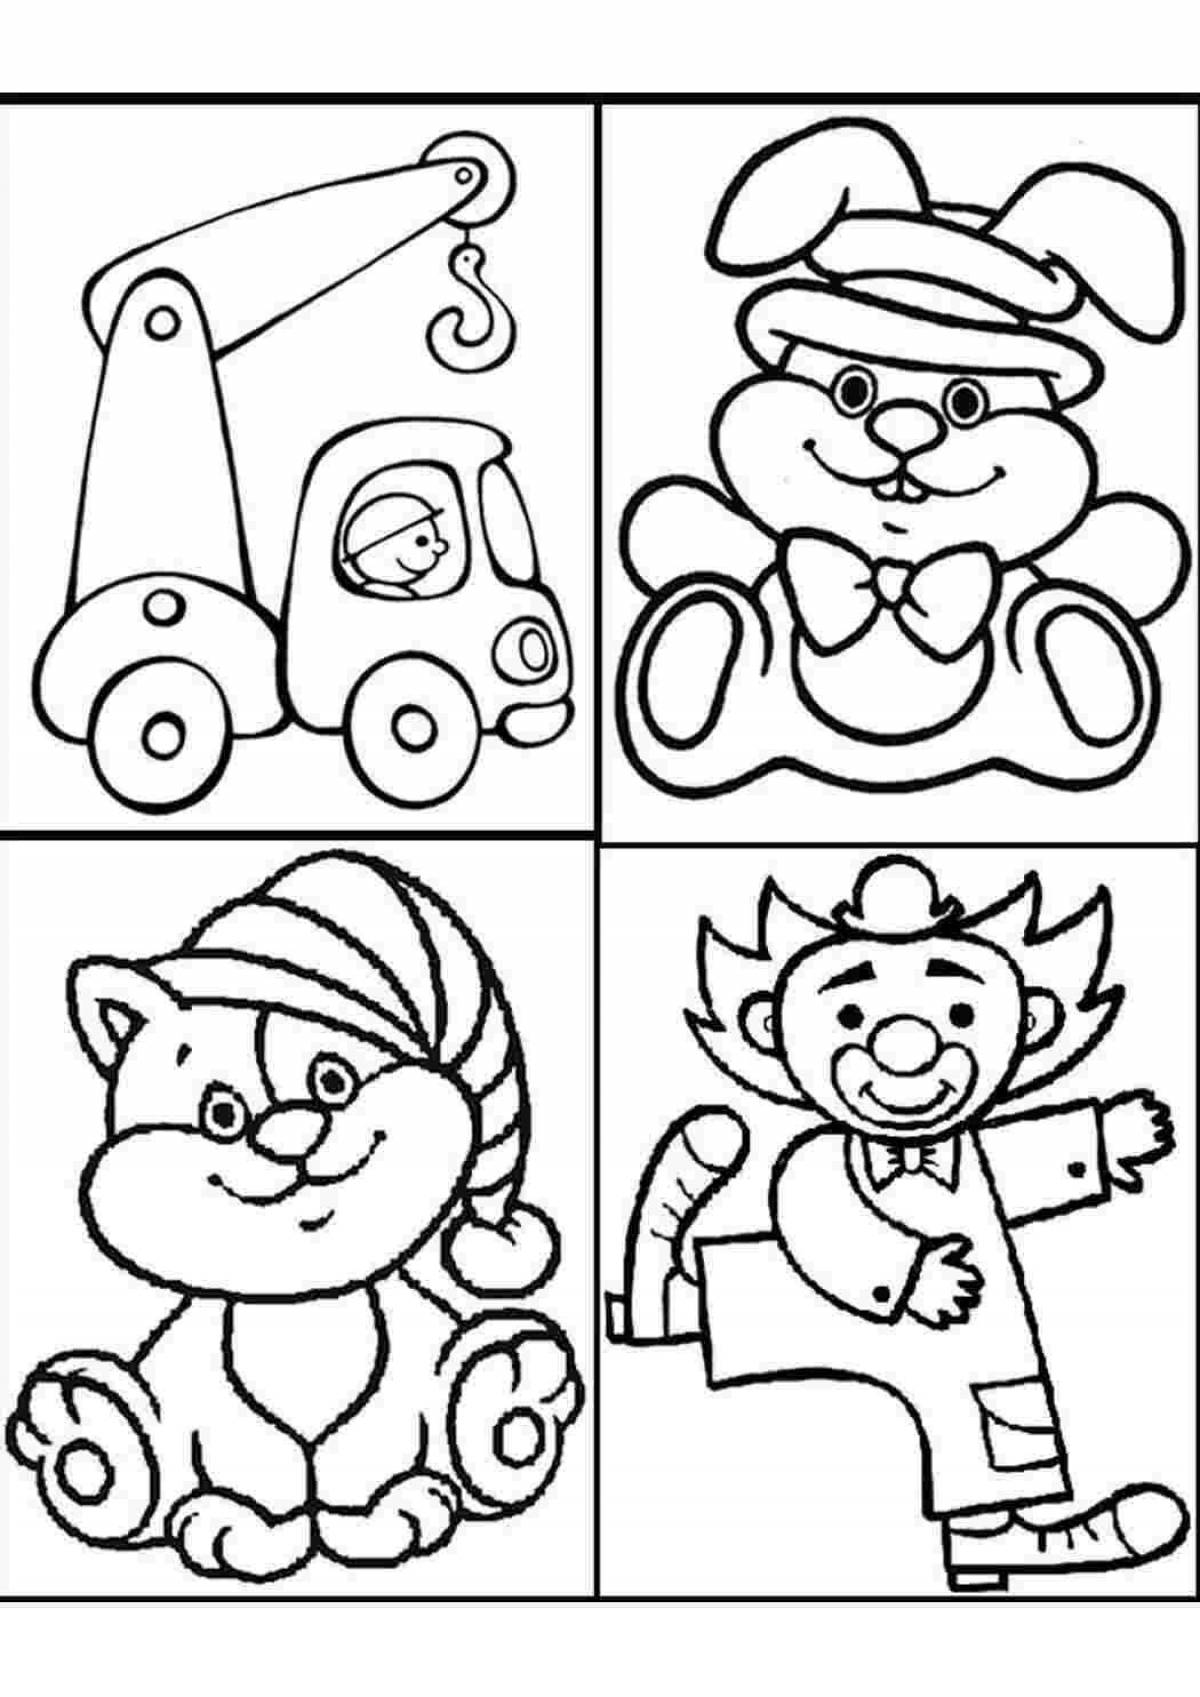 Adorable coloring book for kids a5